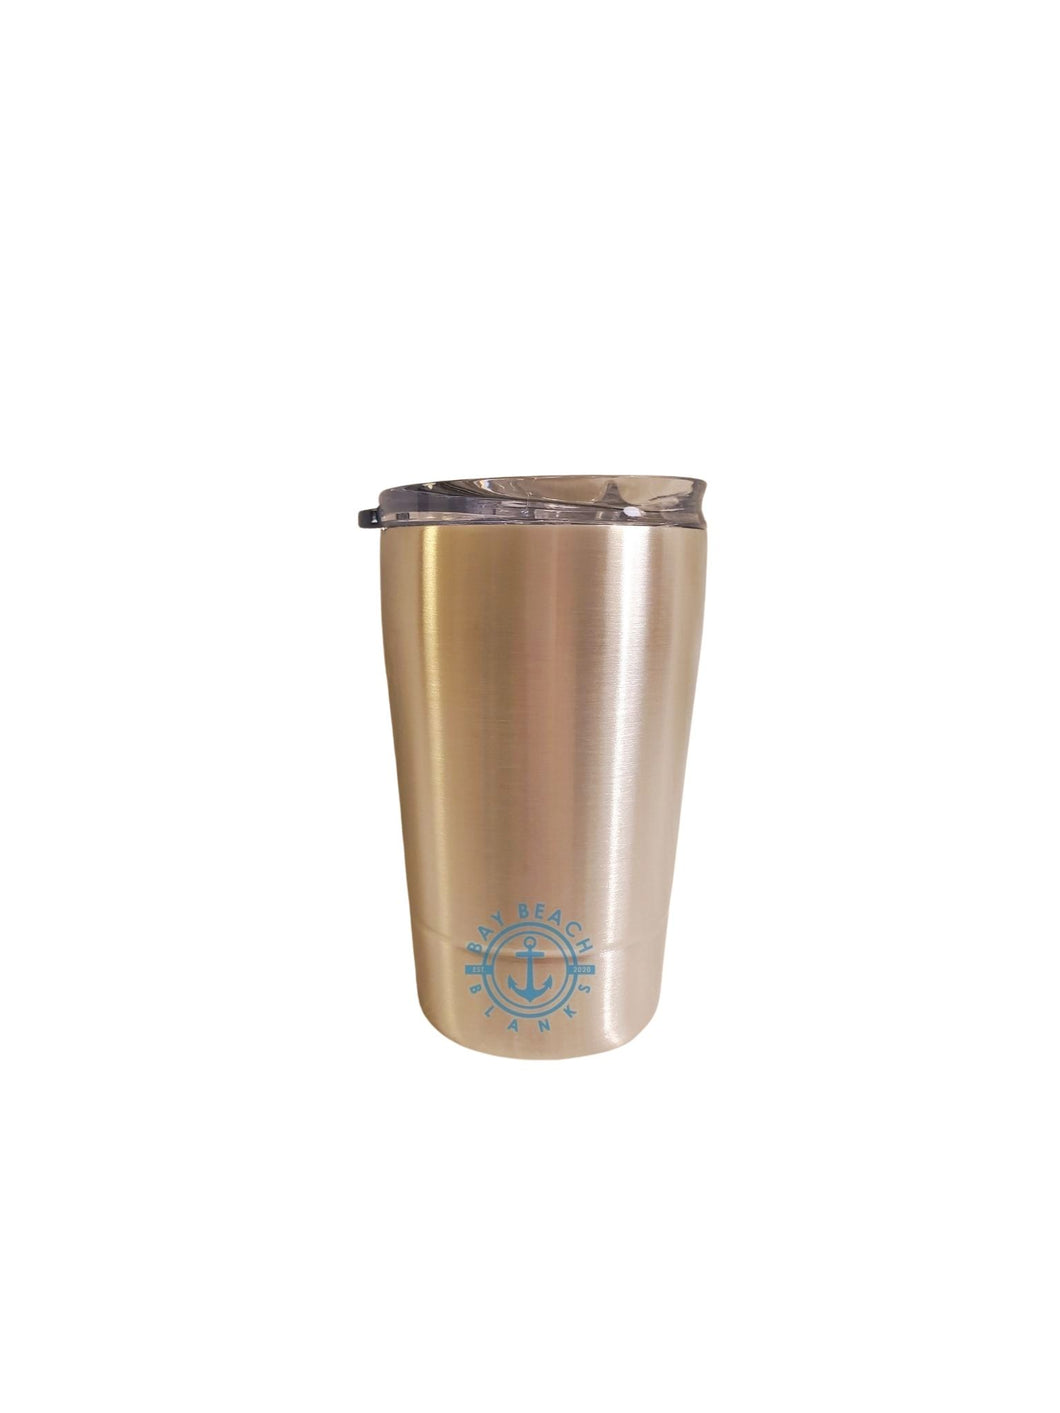 12 oz kids stainless steel tumbler comes with a leakproof sliding lid and plastic straw. This travel cup is double wall insulated making it great for hot and cold beverages.